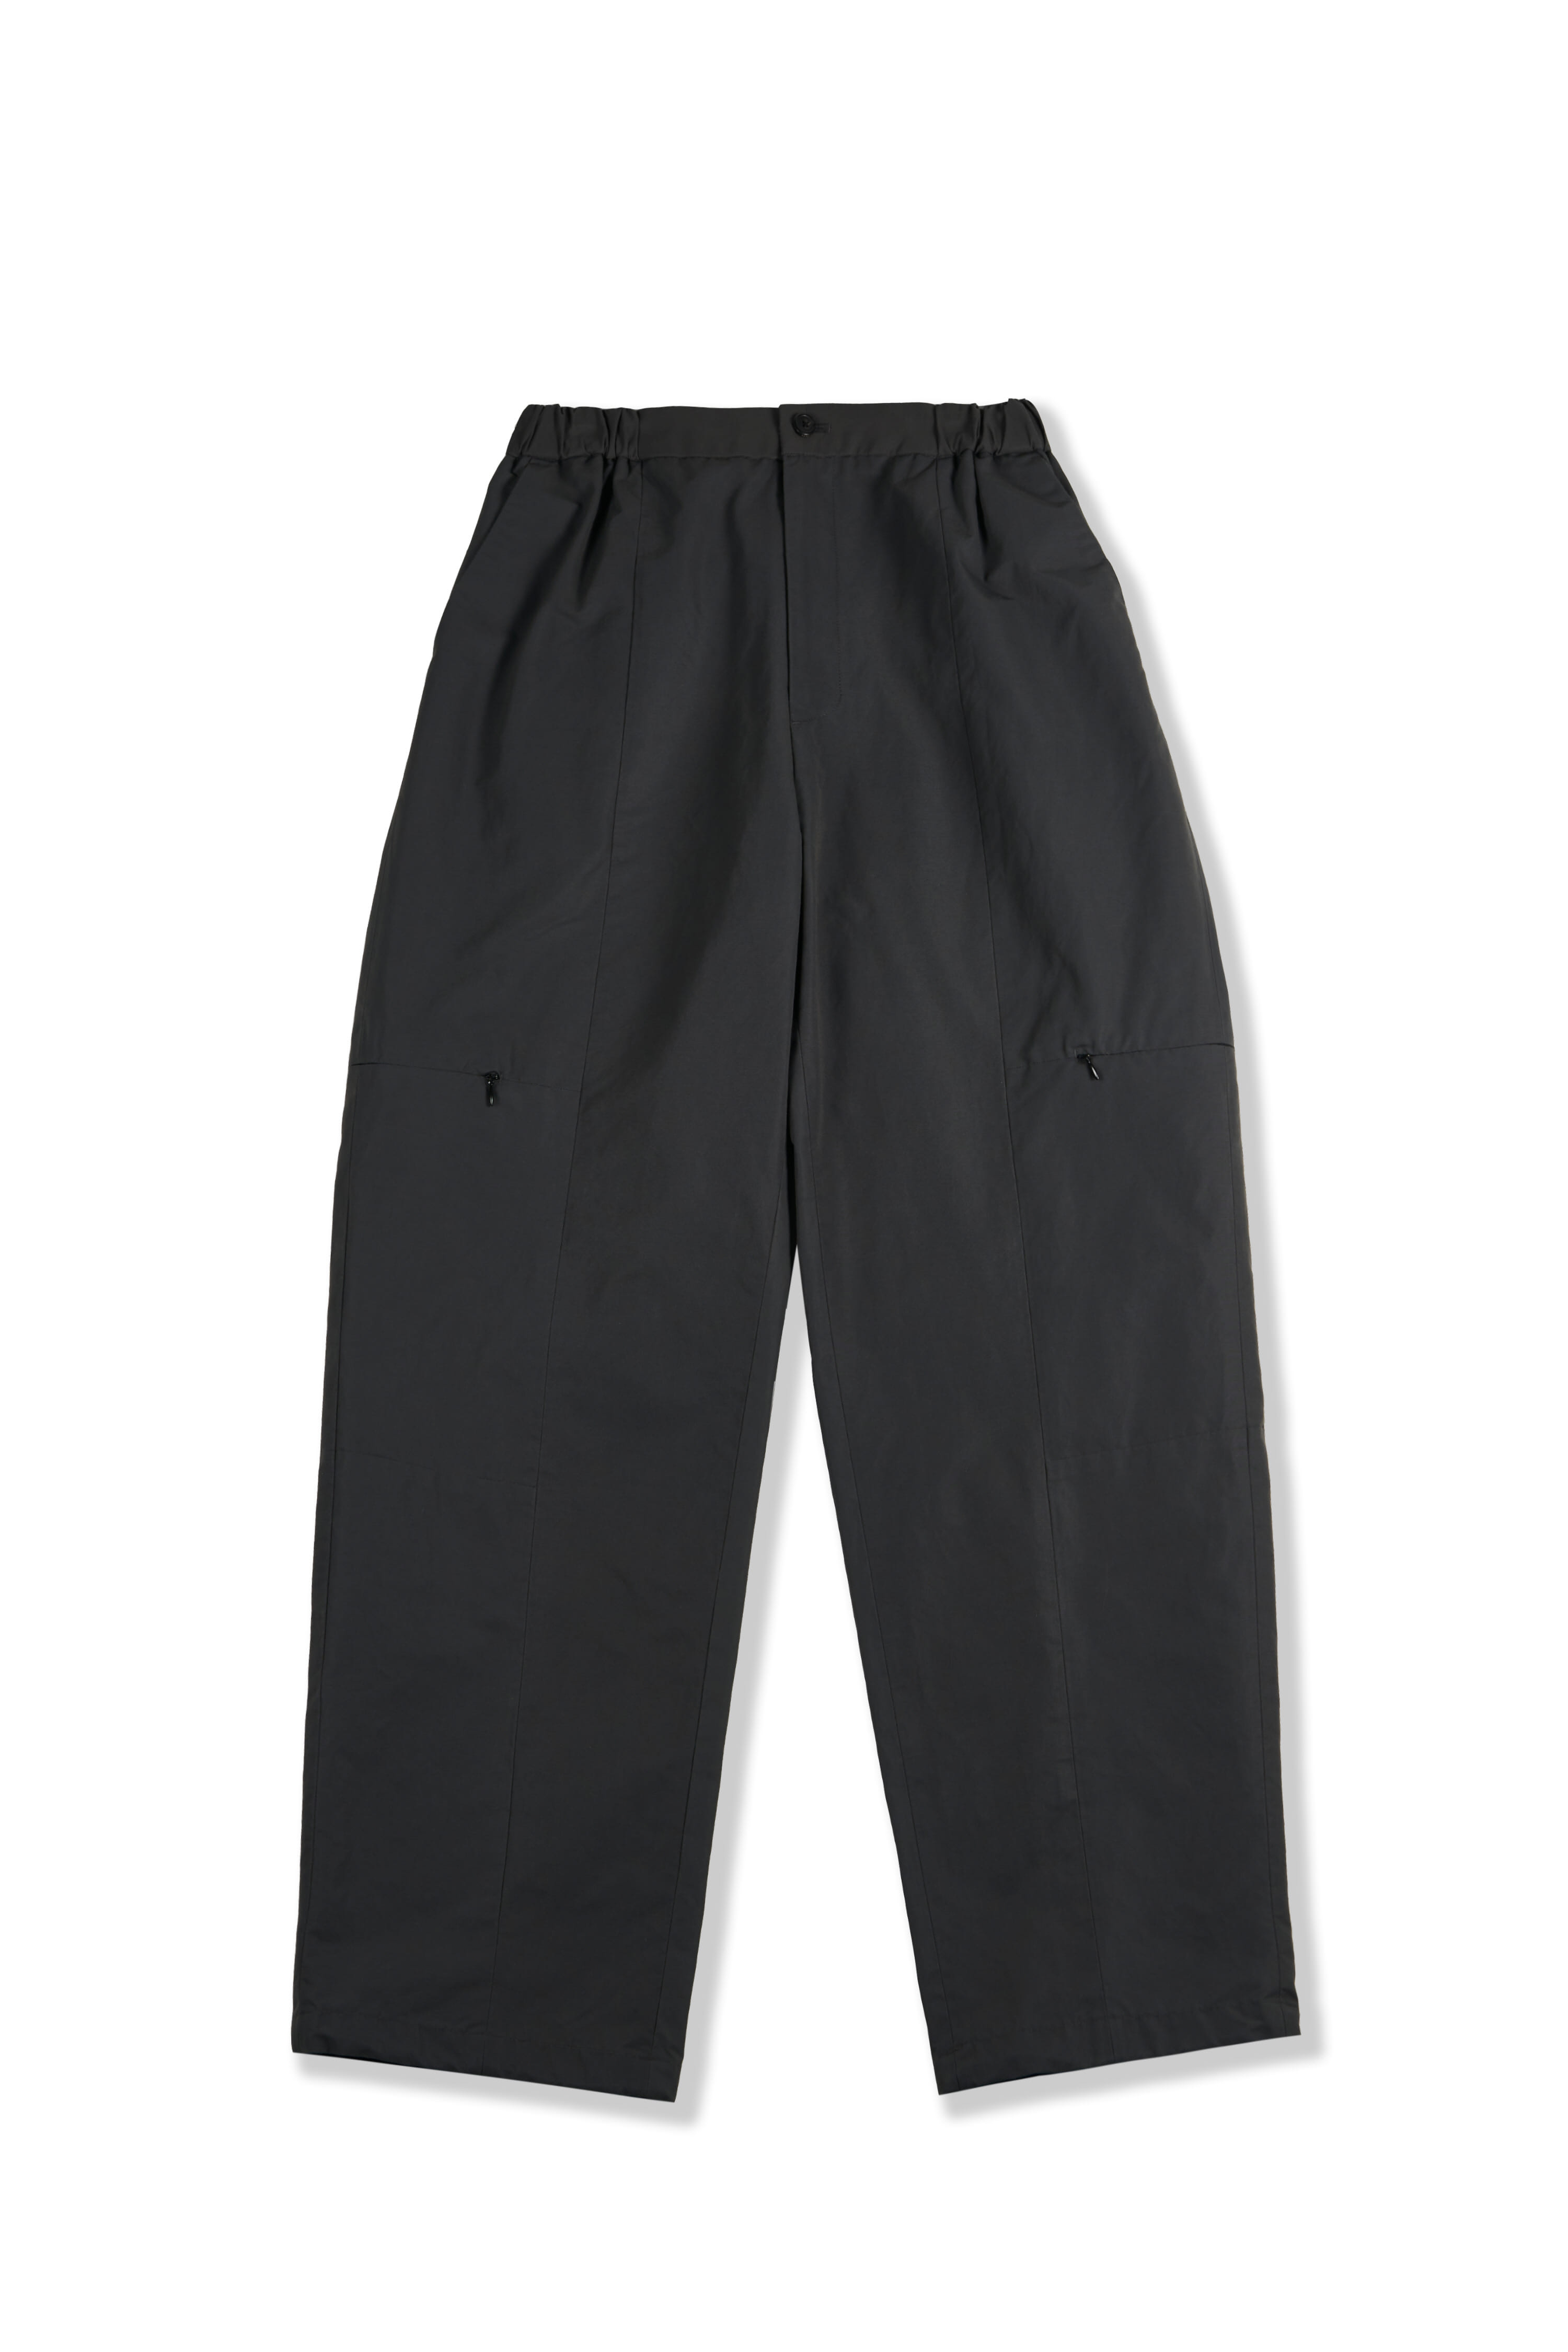 [23&#039;SPRING] mountain pants_charcoal